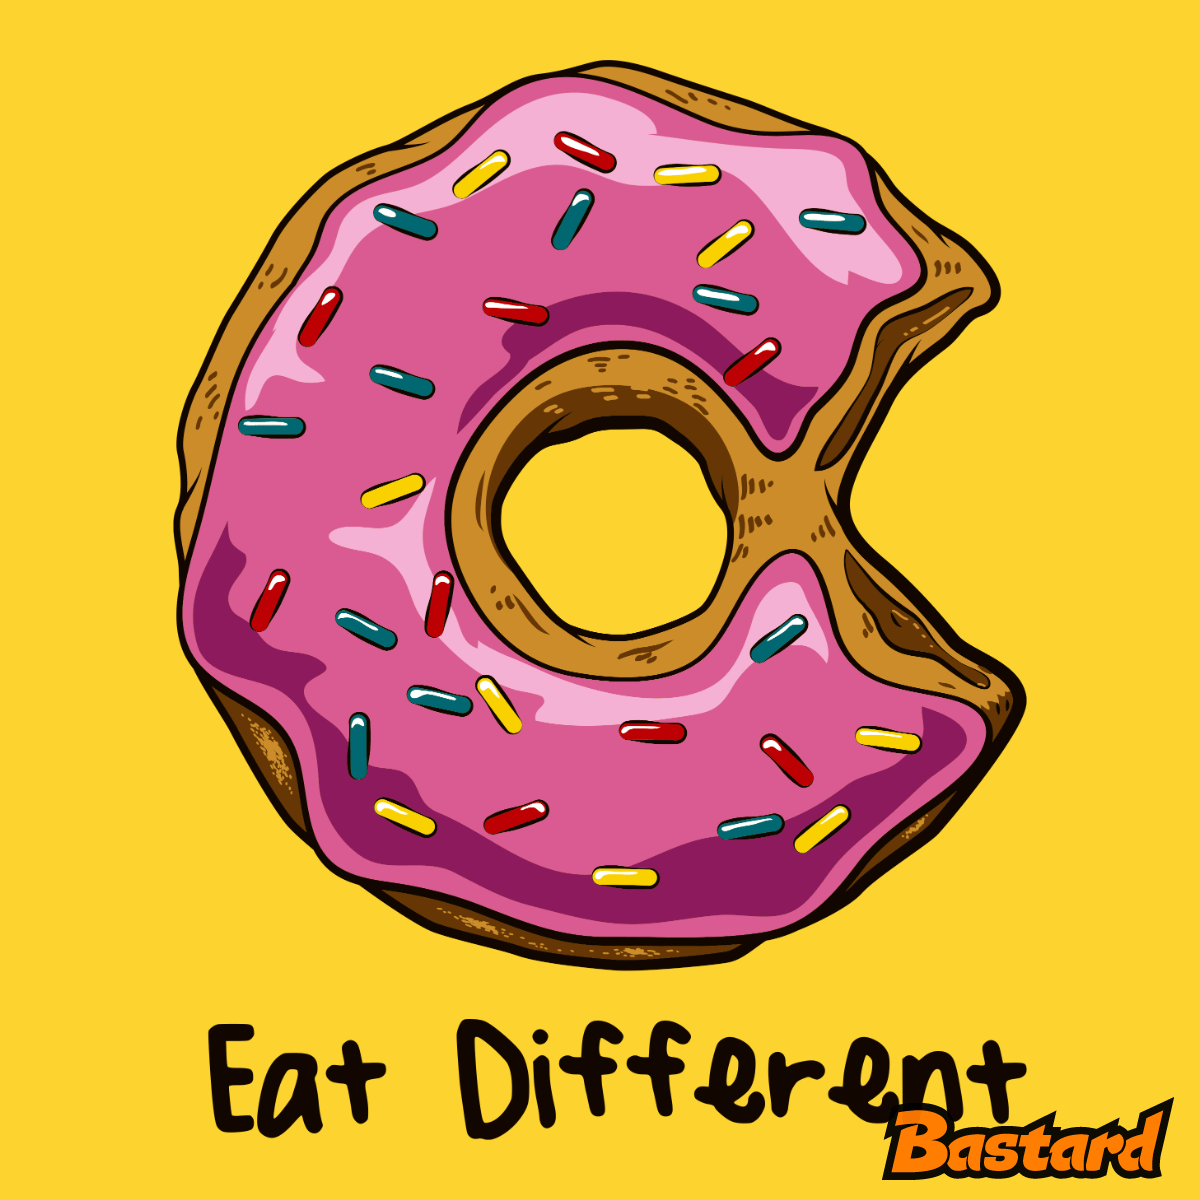 Eat different